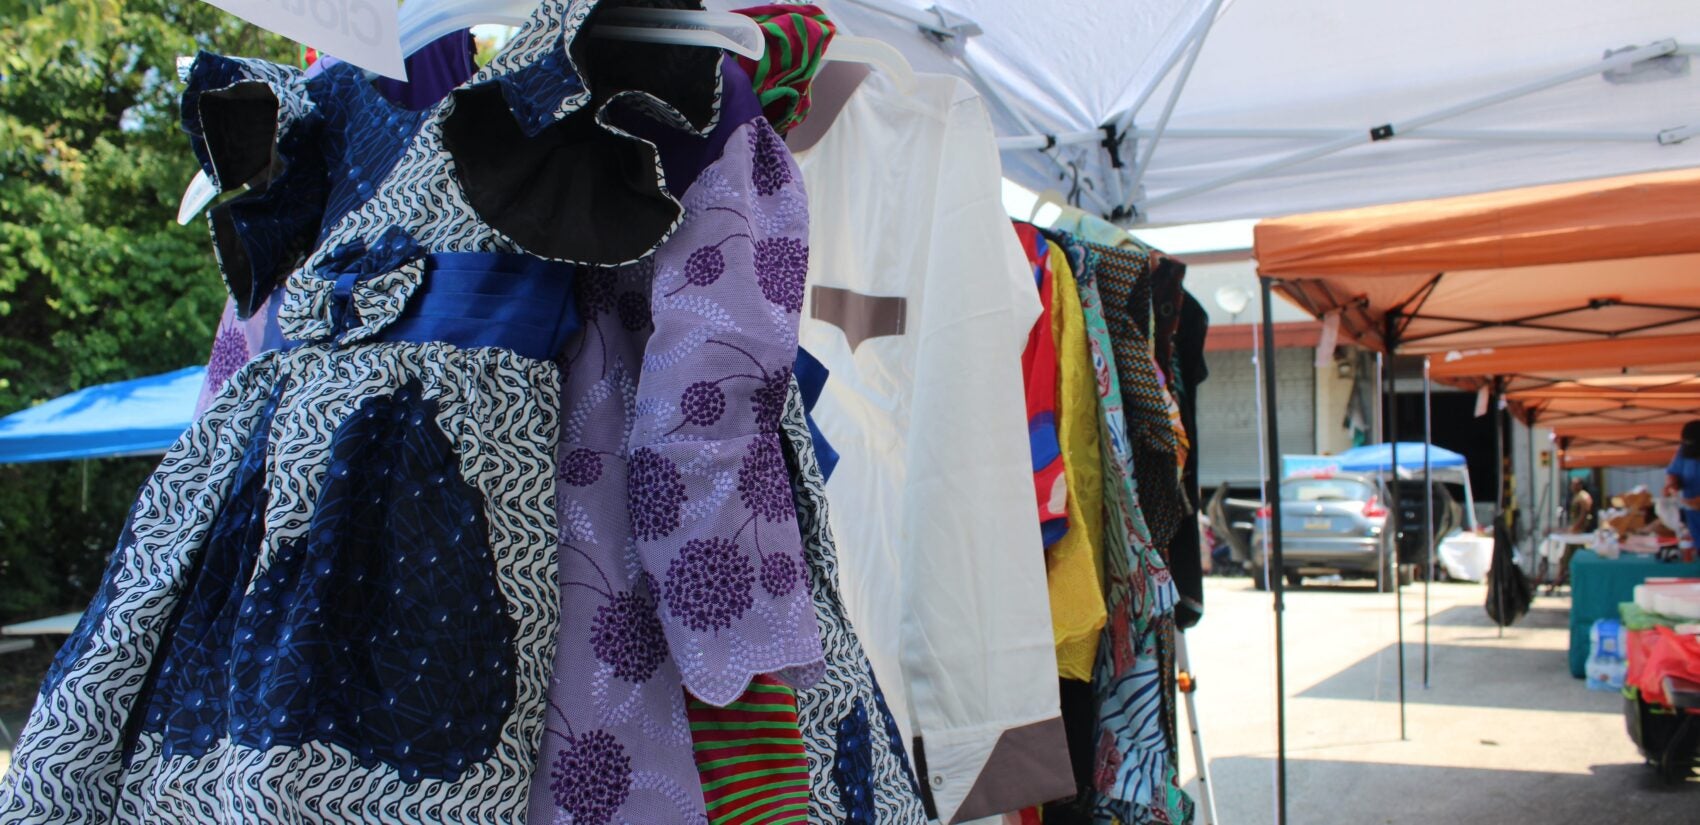 Vendors sold clothes, food, and other items from different African countries. (Emily Neil/WHYY)